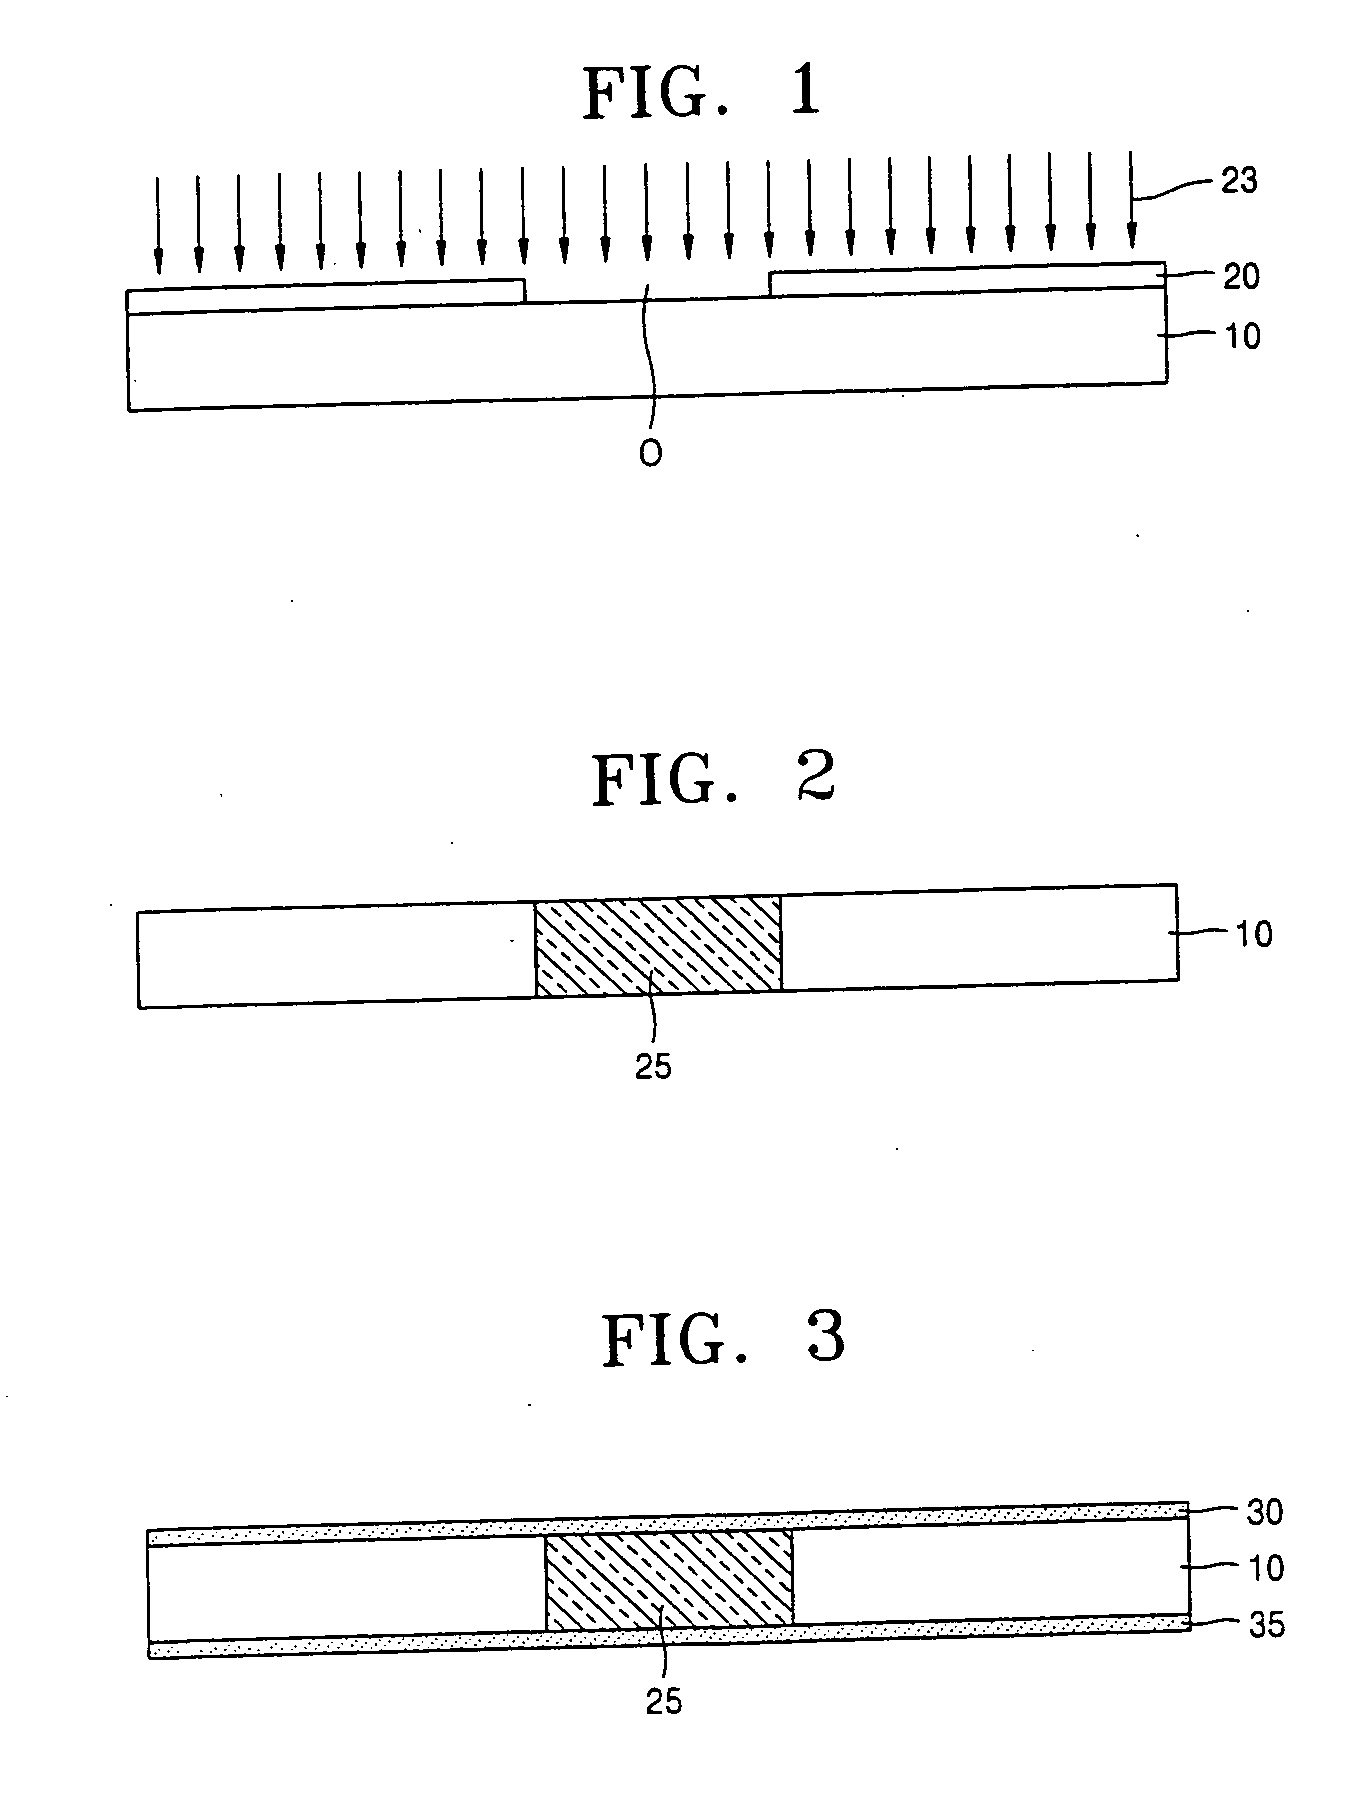 Electron beam lens for micro-column electron beam apparatus and method of fabricating the same